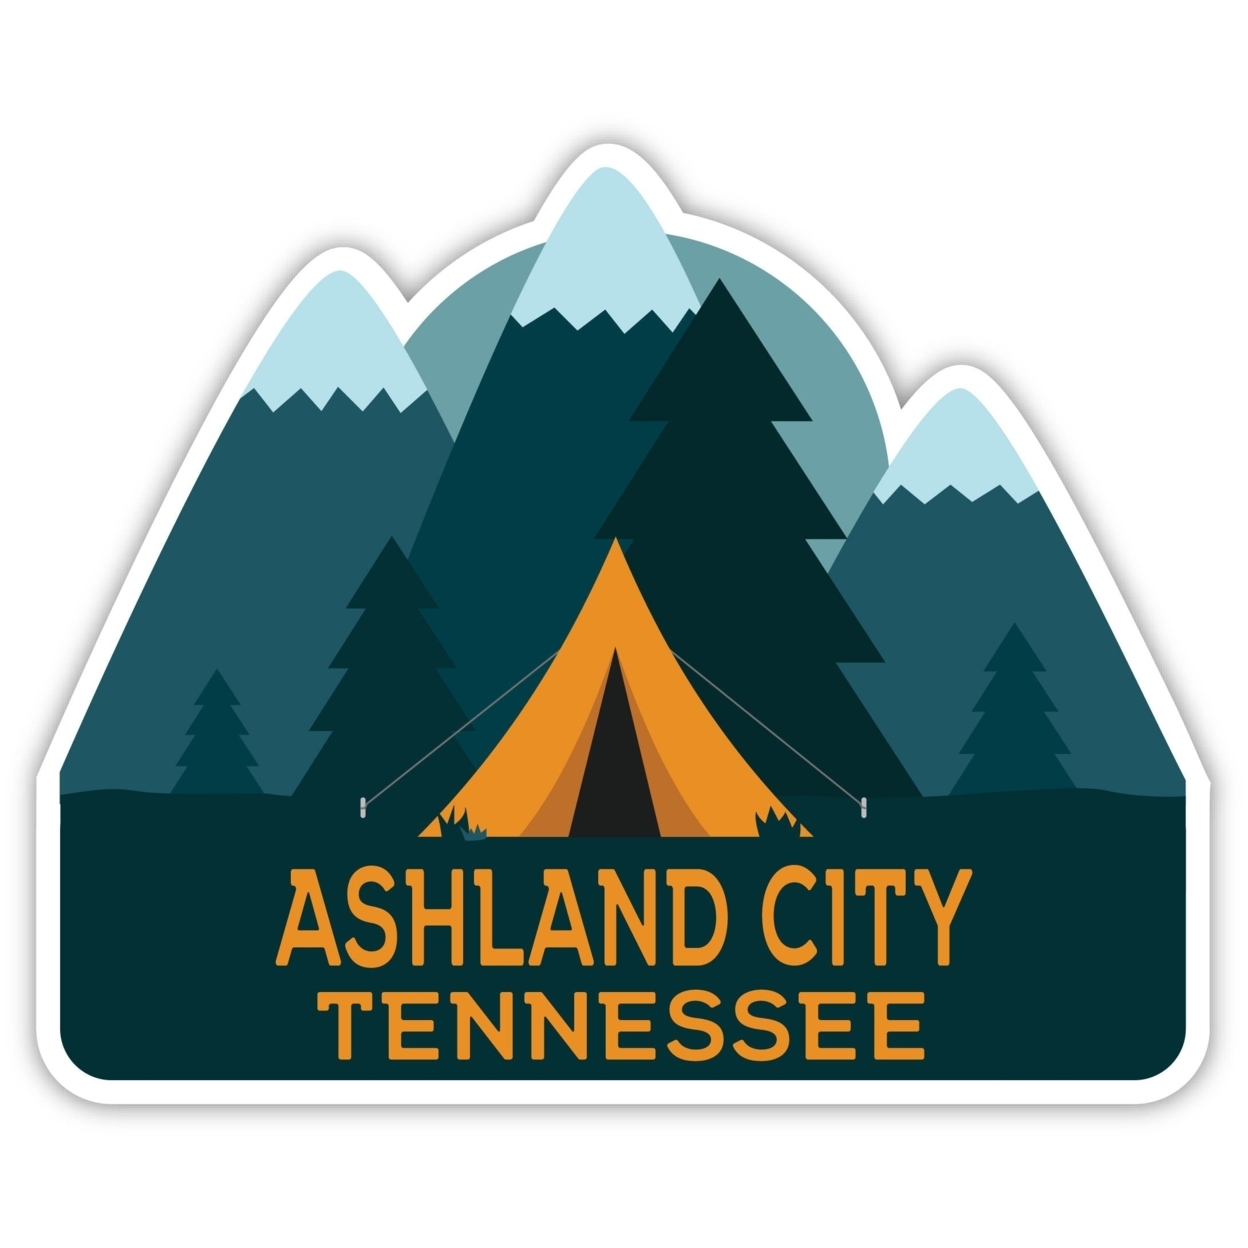 Ashland City Tennessee Souvenir Decorative Stickers (Choose Theme And Size) - 4-Pack, 2-Inch, Tent